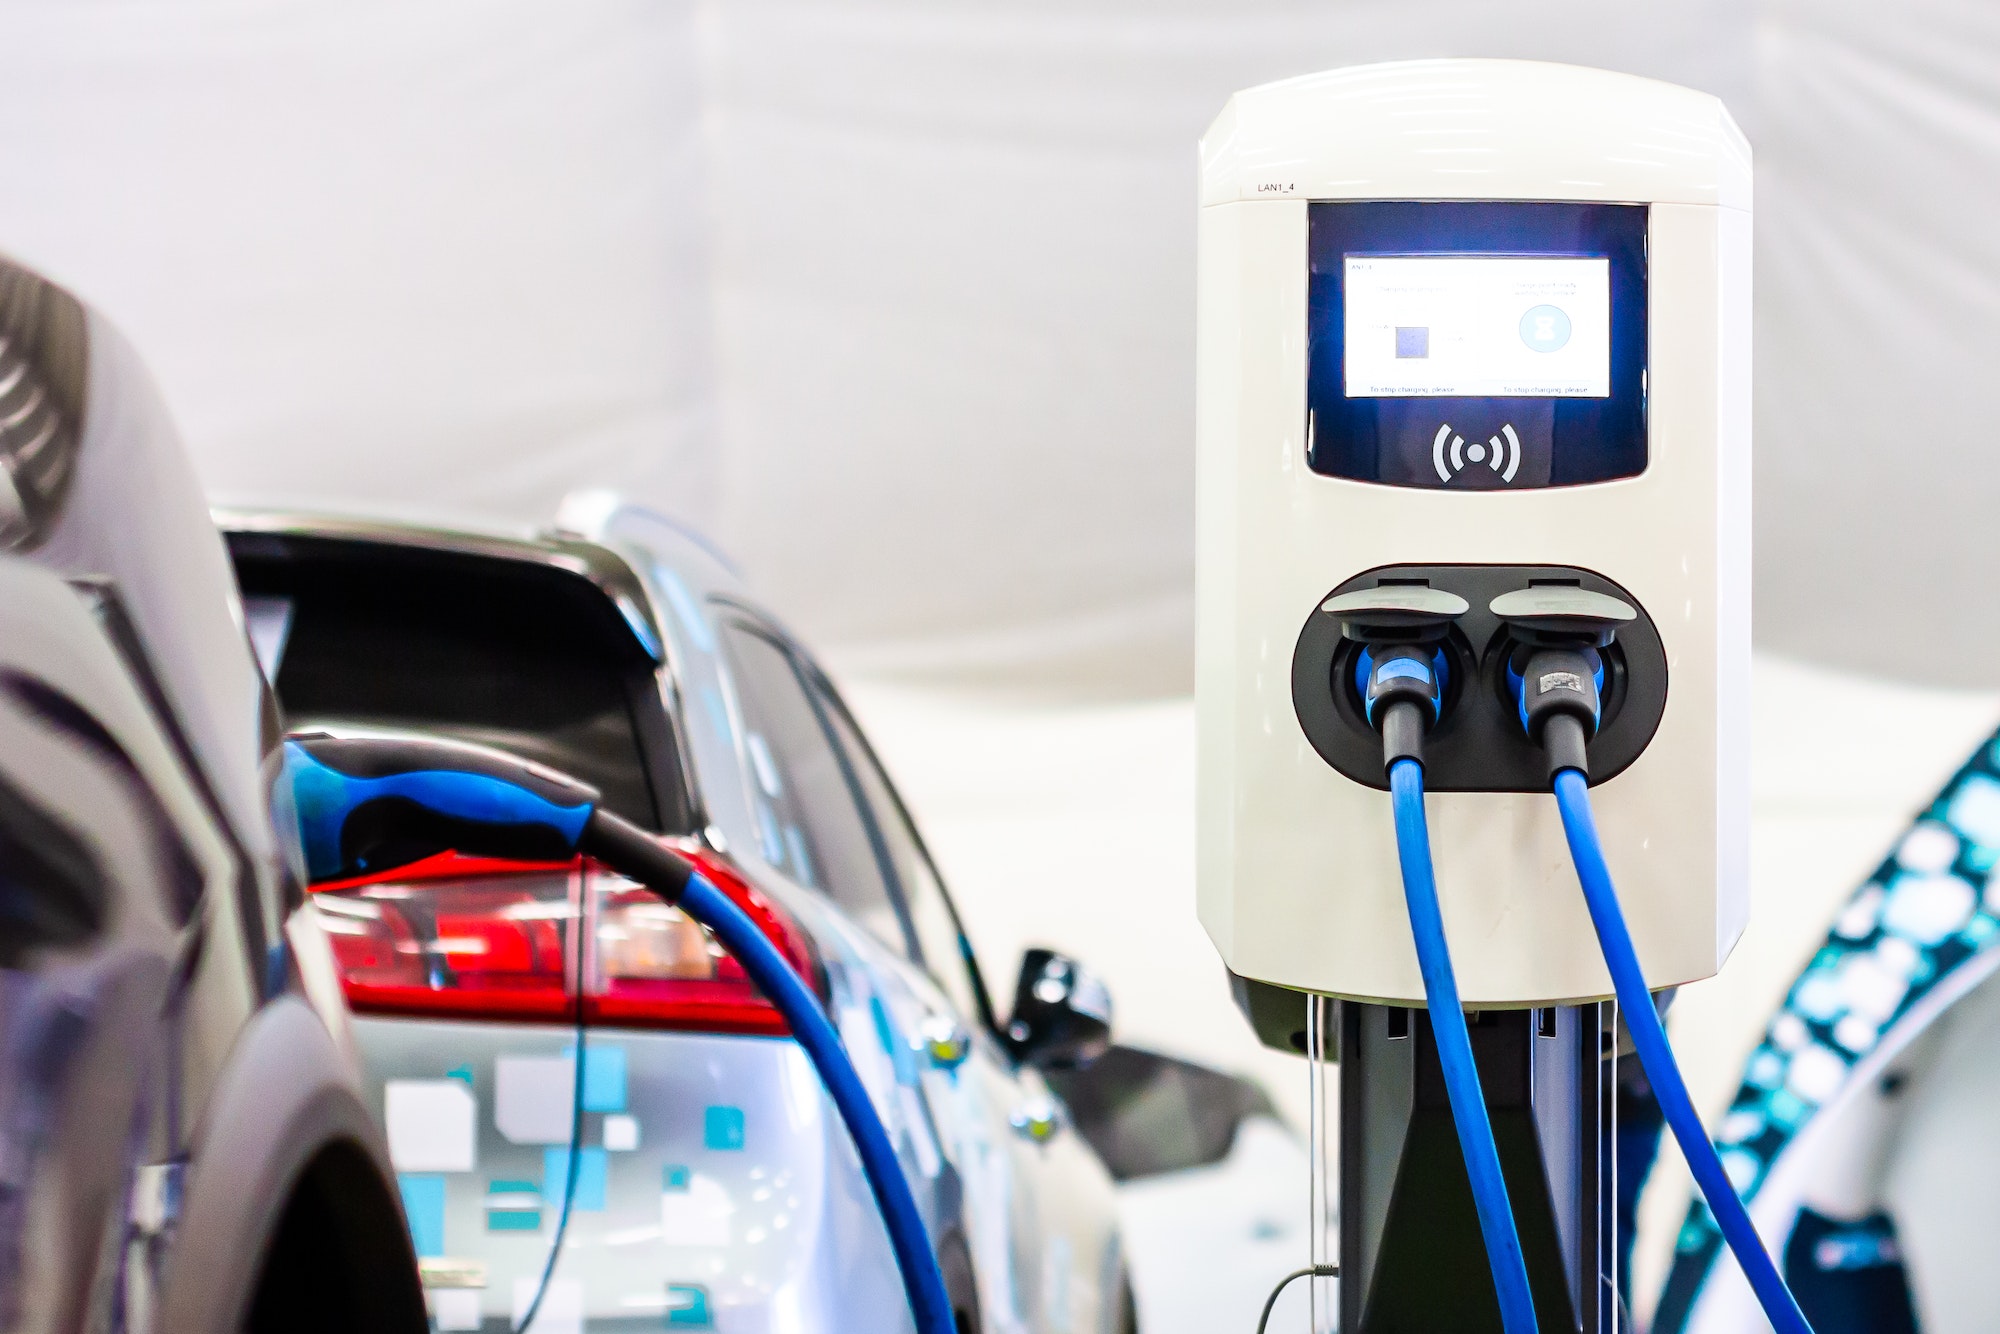 A modern electrical fast charger for the electrical or hybrid PHEV automobiles. An Energy power of